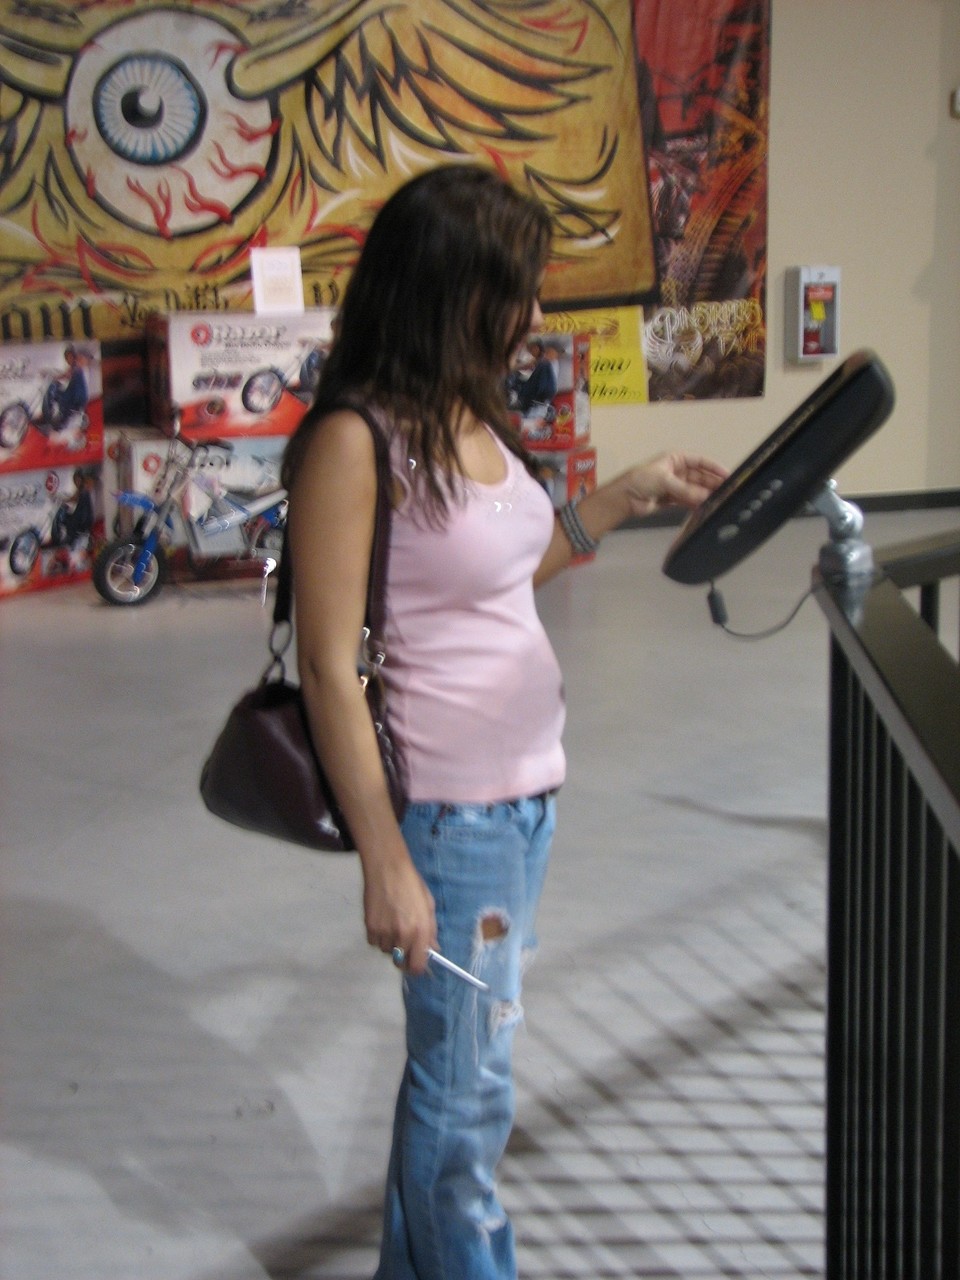 Amateur Katie in tight jeans flashes her big boobs with puffy nips in public photo porno #426861592 | Teen Girl Photos Pics, Amateur, porno mobile